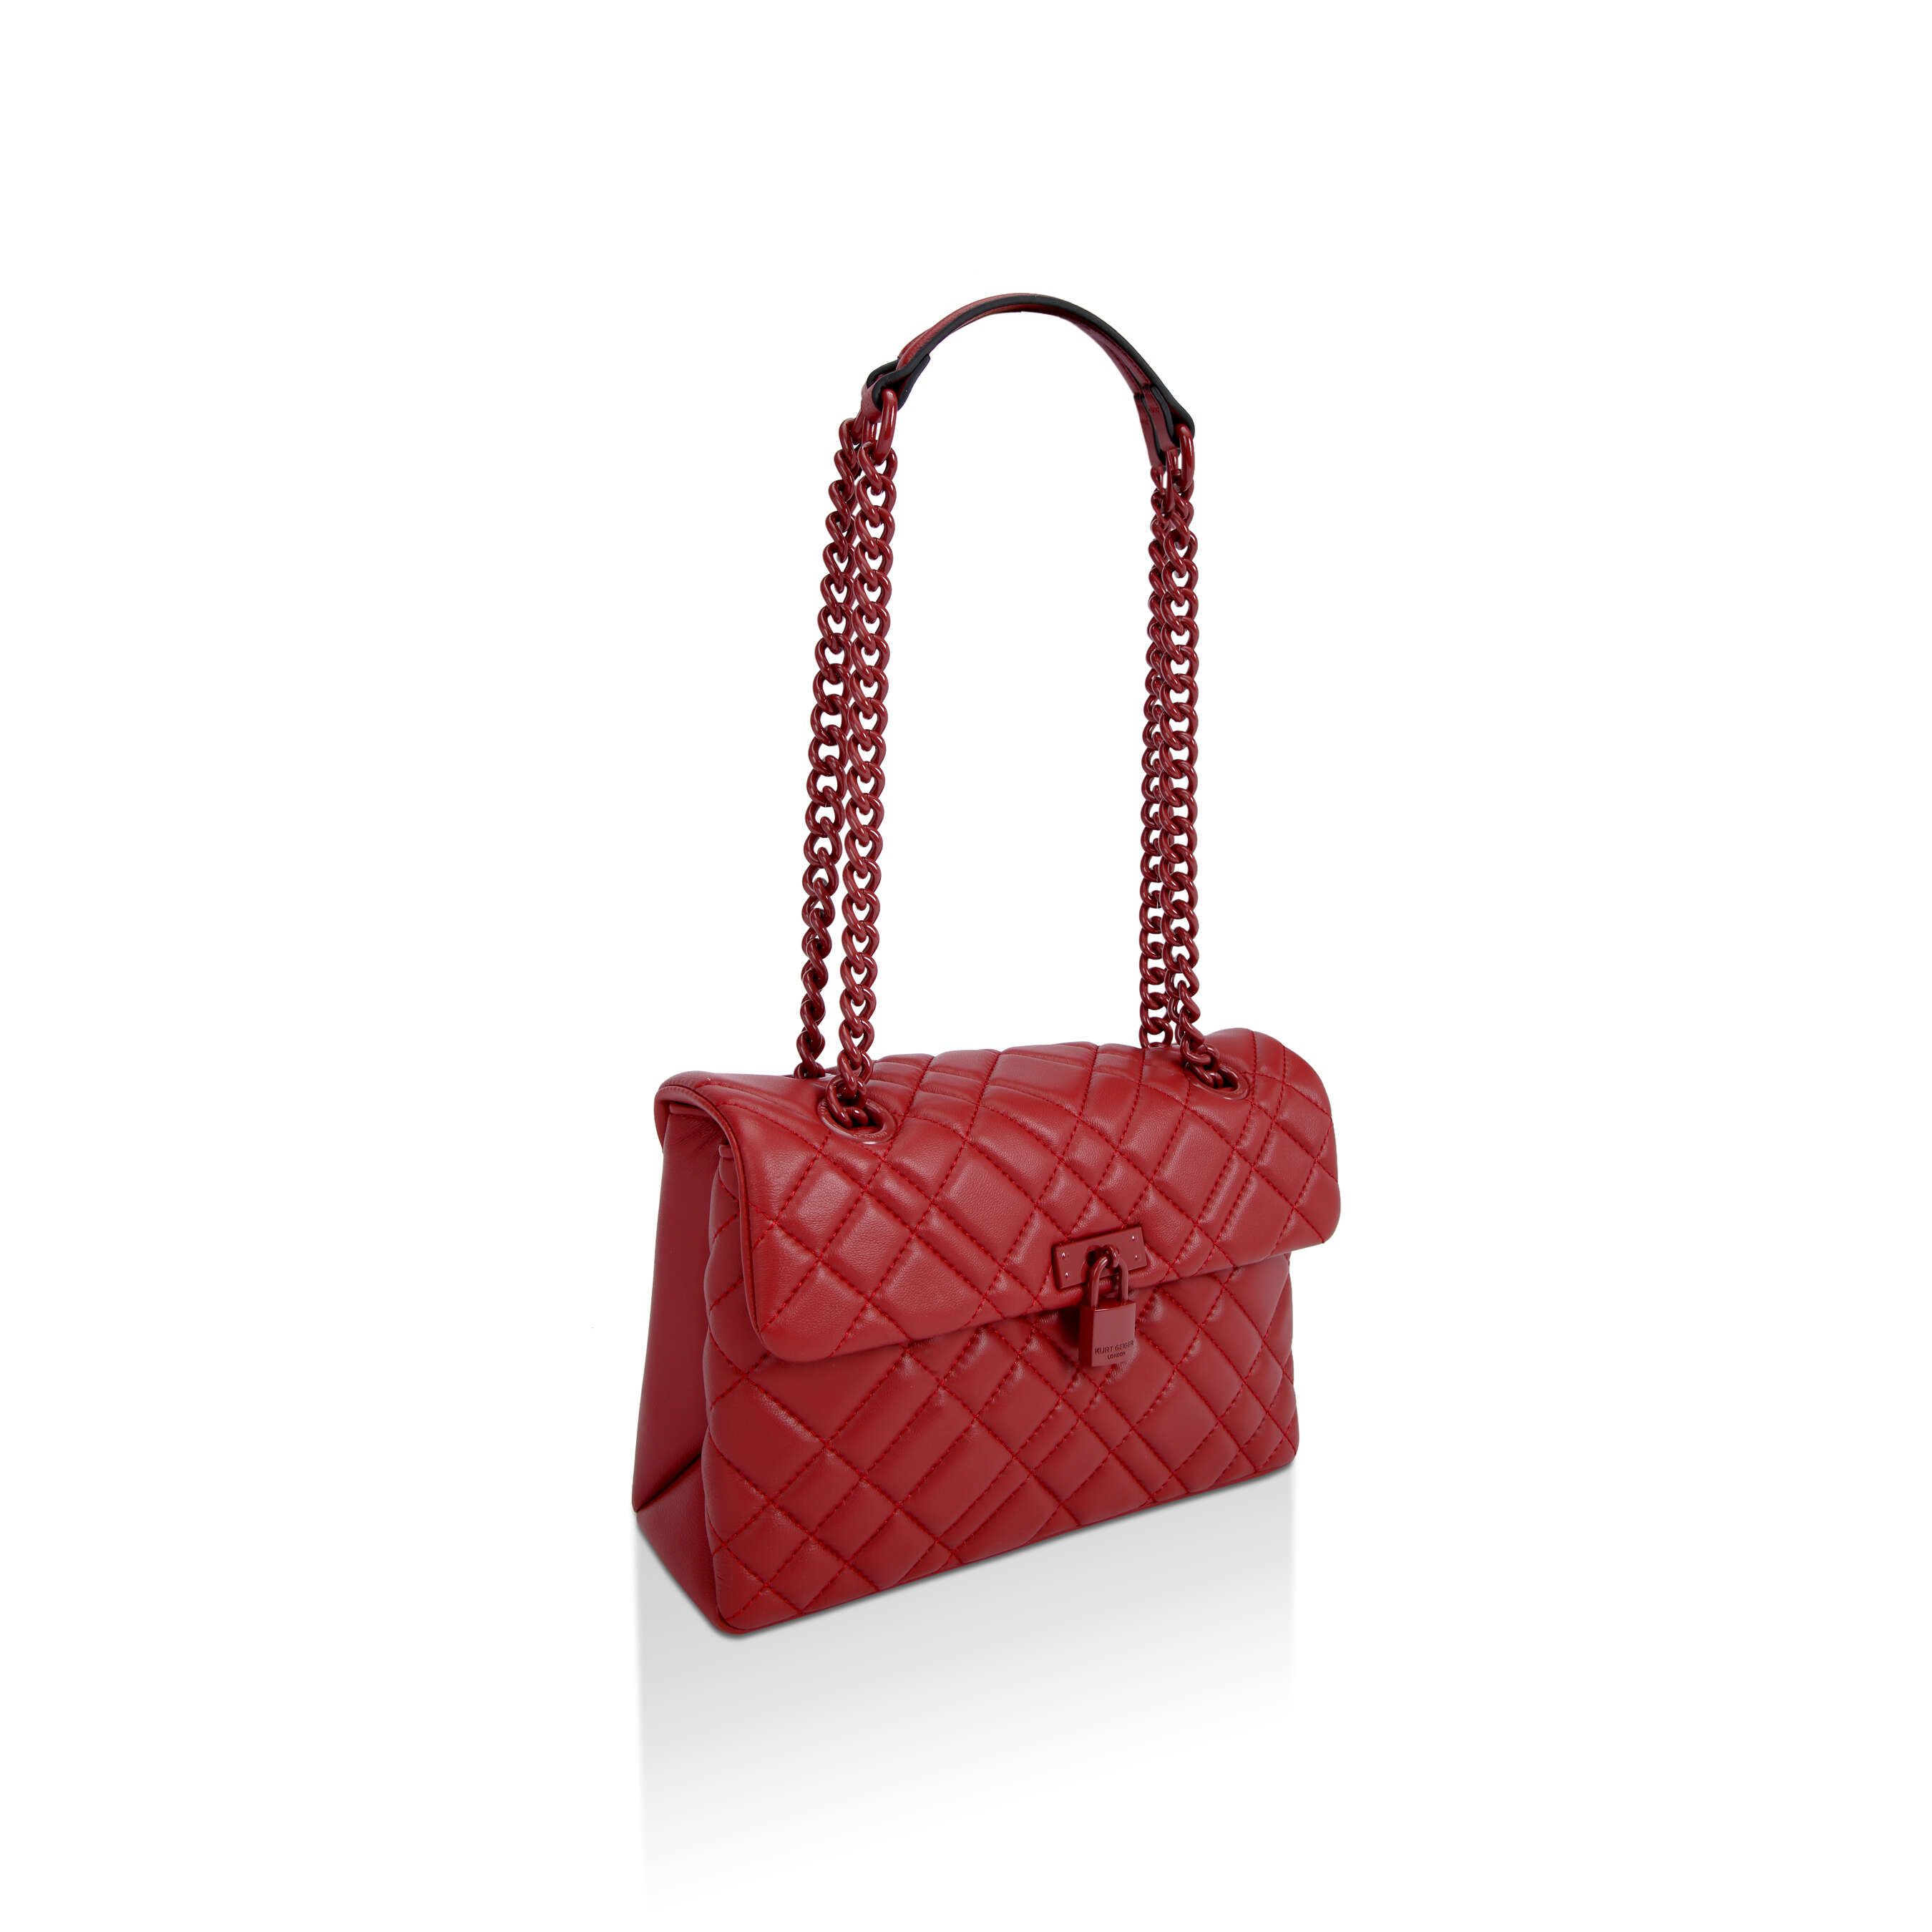 The red KGL Brixton Lock Bag is crafted from soft lambskin leather with overstitch quilting design. There is a wine coloured metal branded padlock on the front flap.